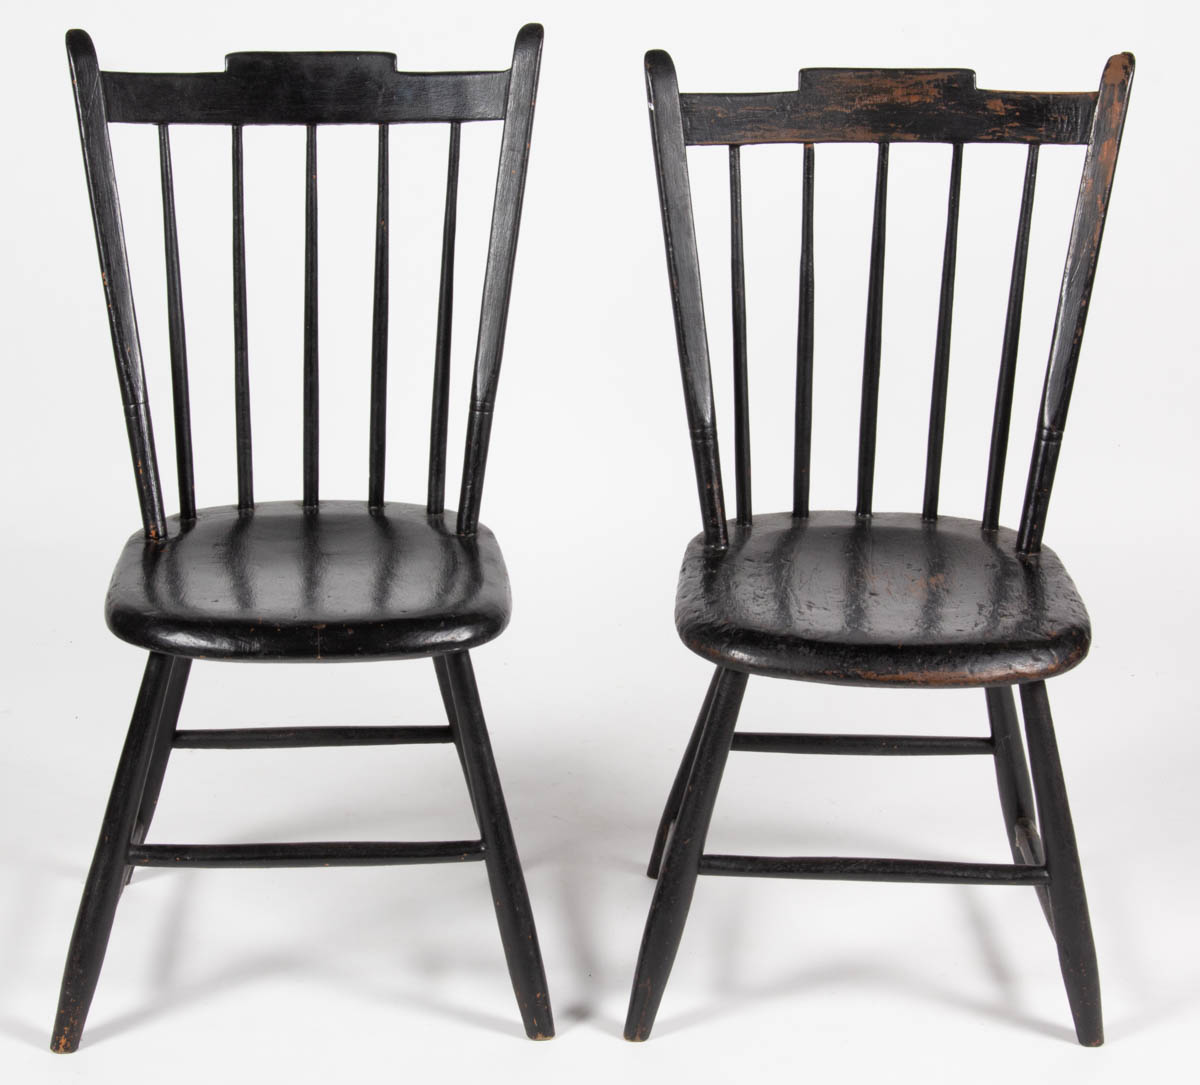 SAMUEL FIZER, FINCASTLE, VALLEY OF VIRGINIA PAIR OF WINDSOR SIDE CHAIRS